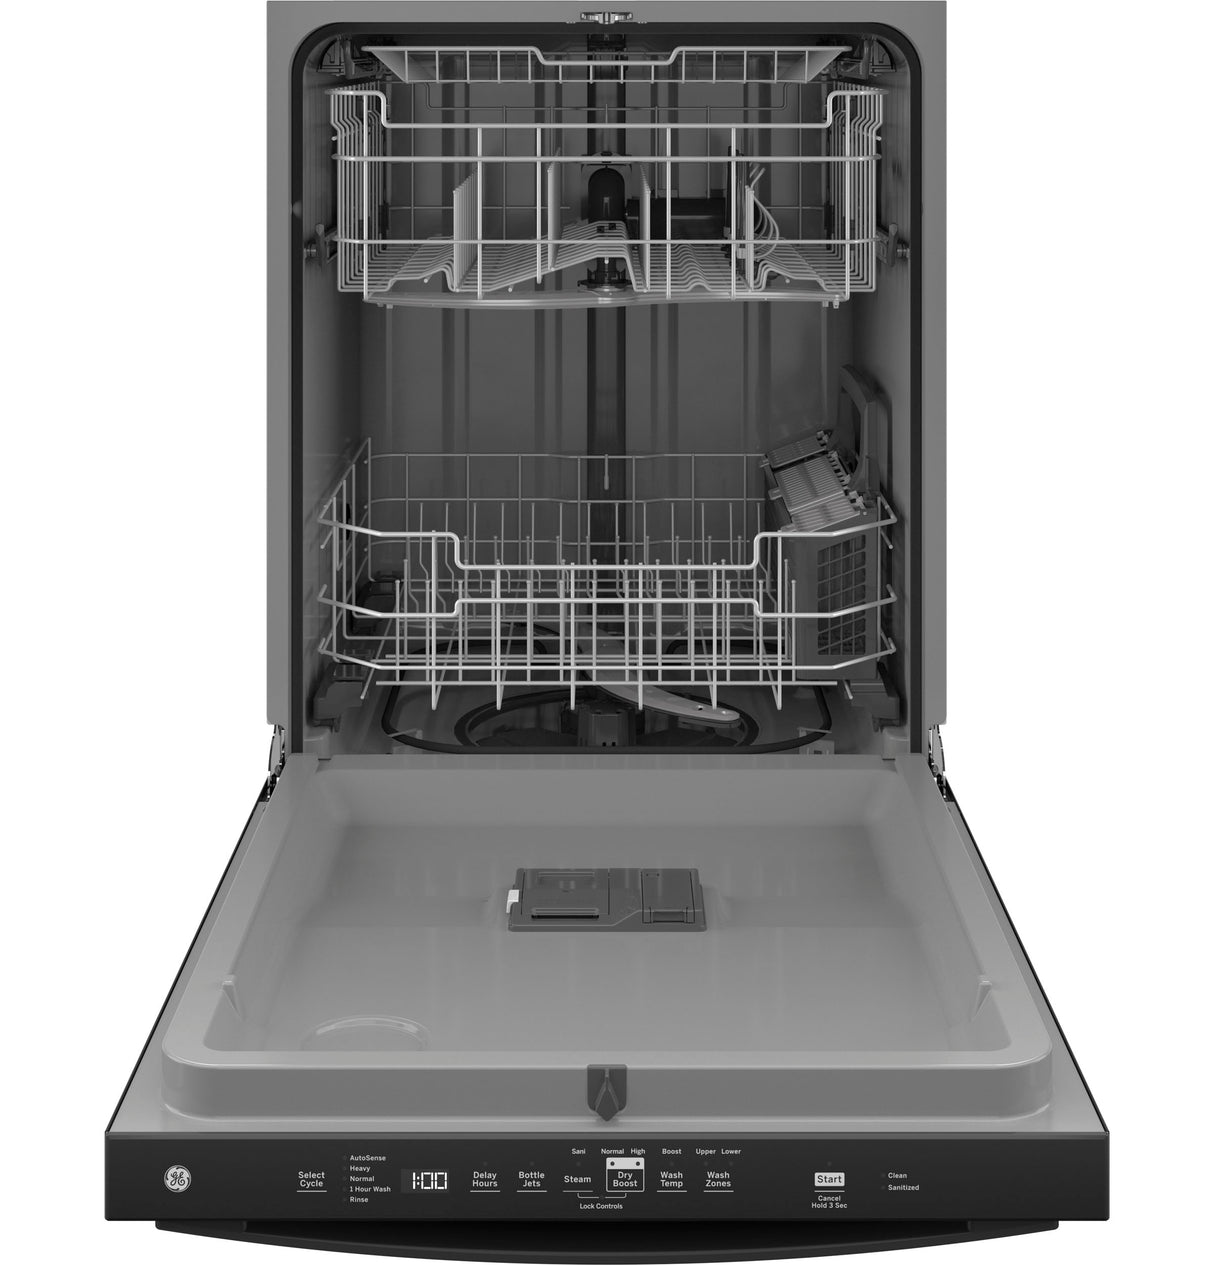 GE(R) ENERGY STAR(R) Top Control with Plastic Interior Dishwasher with Sanitize Cycle & Dry Boost - (GDT630PGRBB)